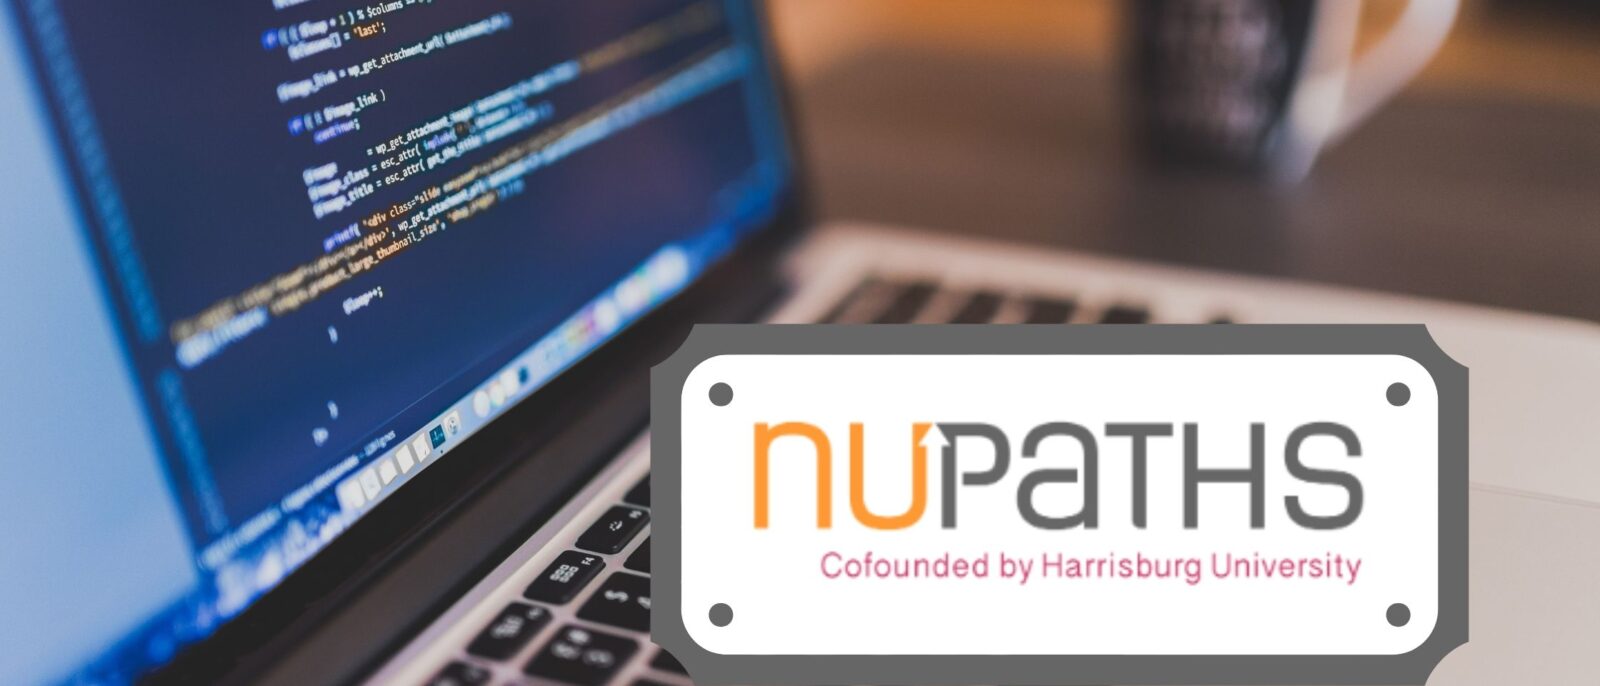 Announcing new roles at NuPaths, a company co-founded by Harrisburg University